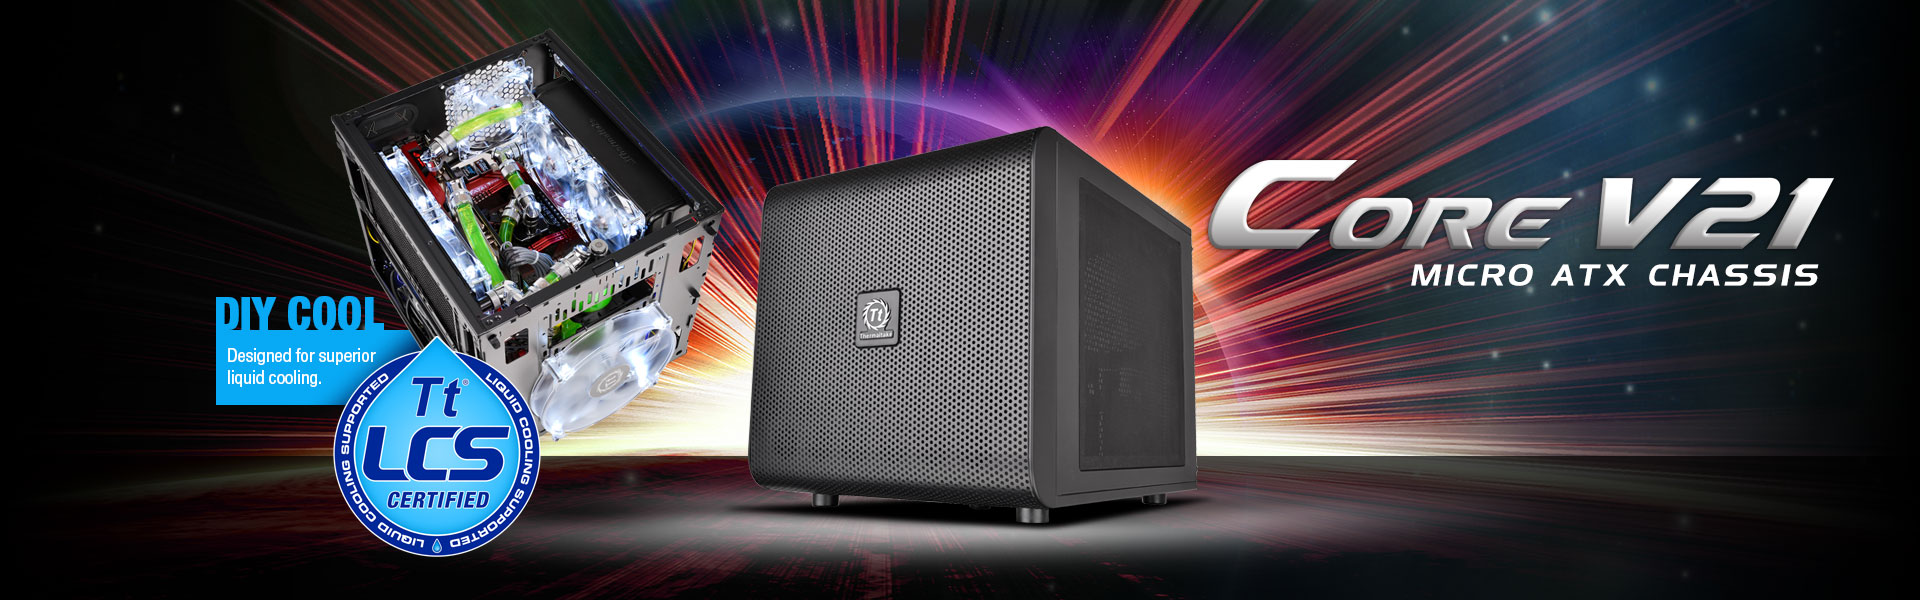 Thermaltake Releases New Stackable Core V21 Micro M-ATX Chassis with